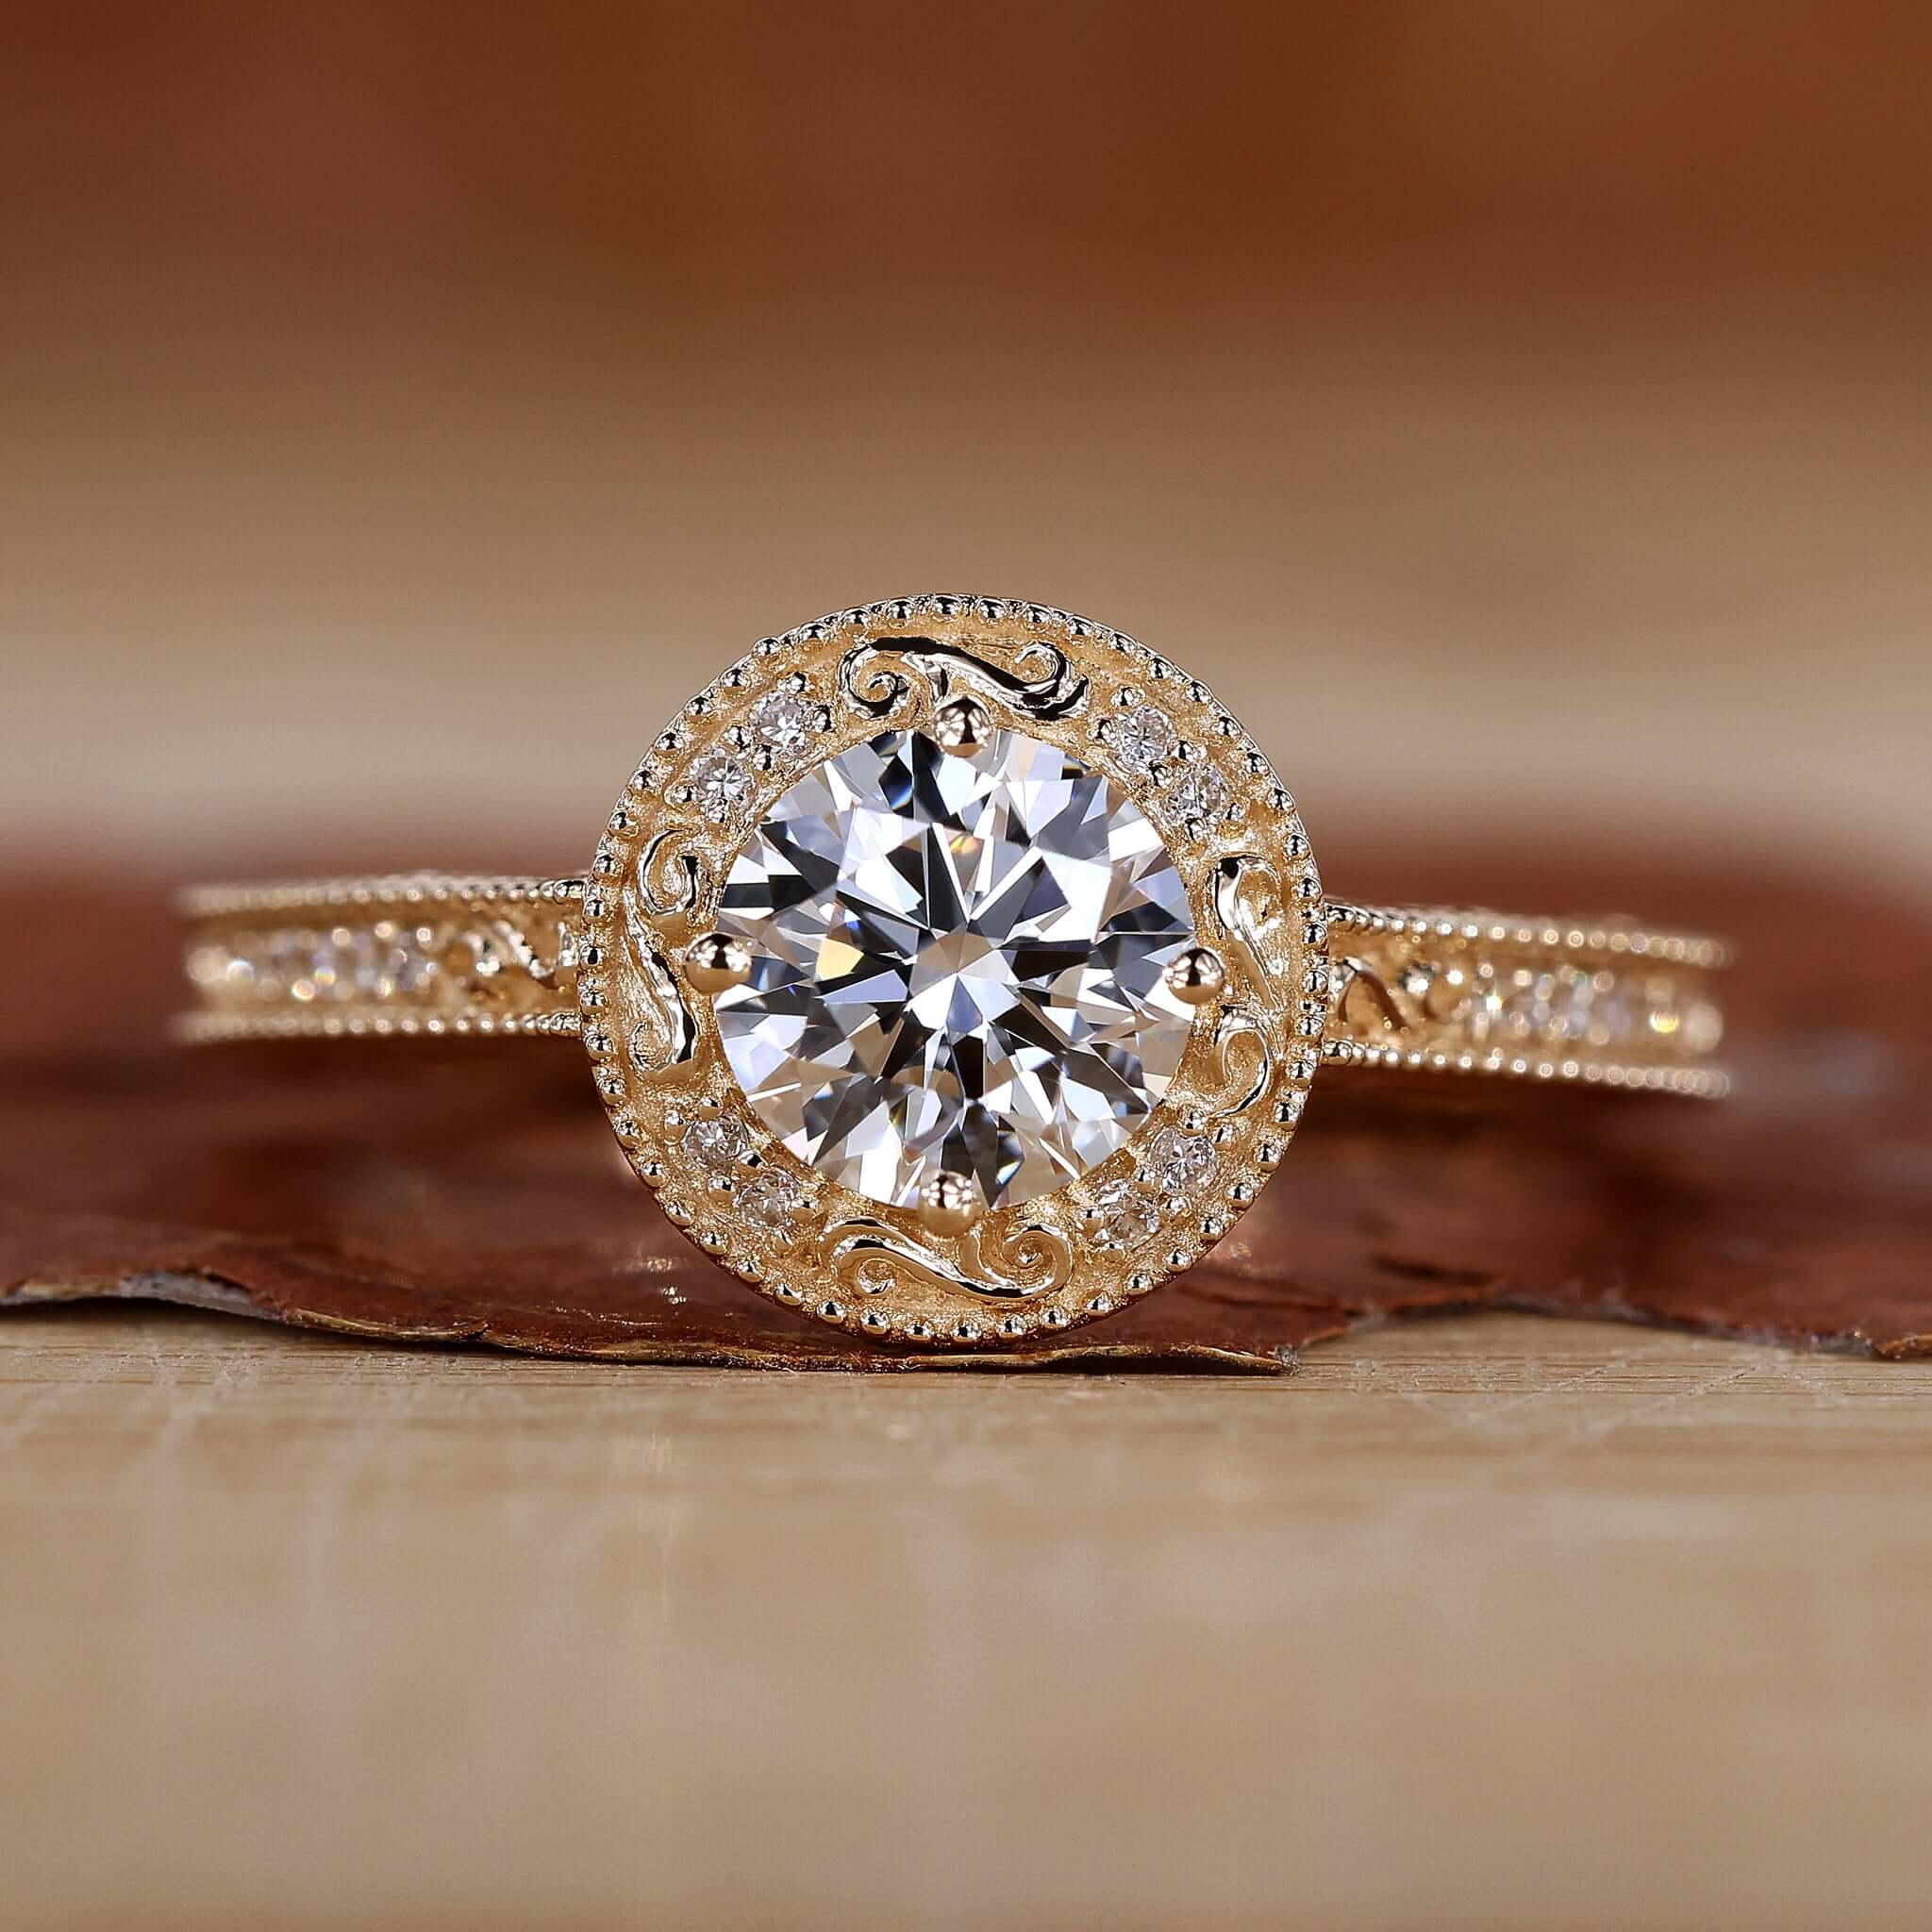 Exquisite vintage gold ring, showcasing intricate designs and timeless elegance.